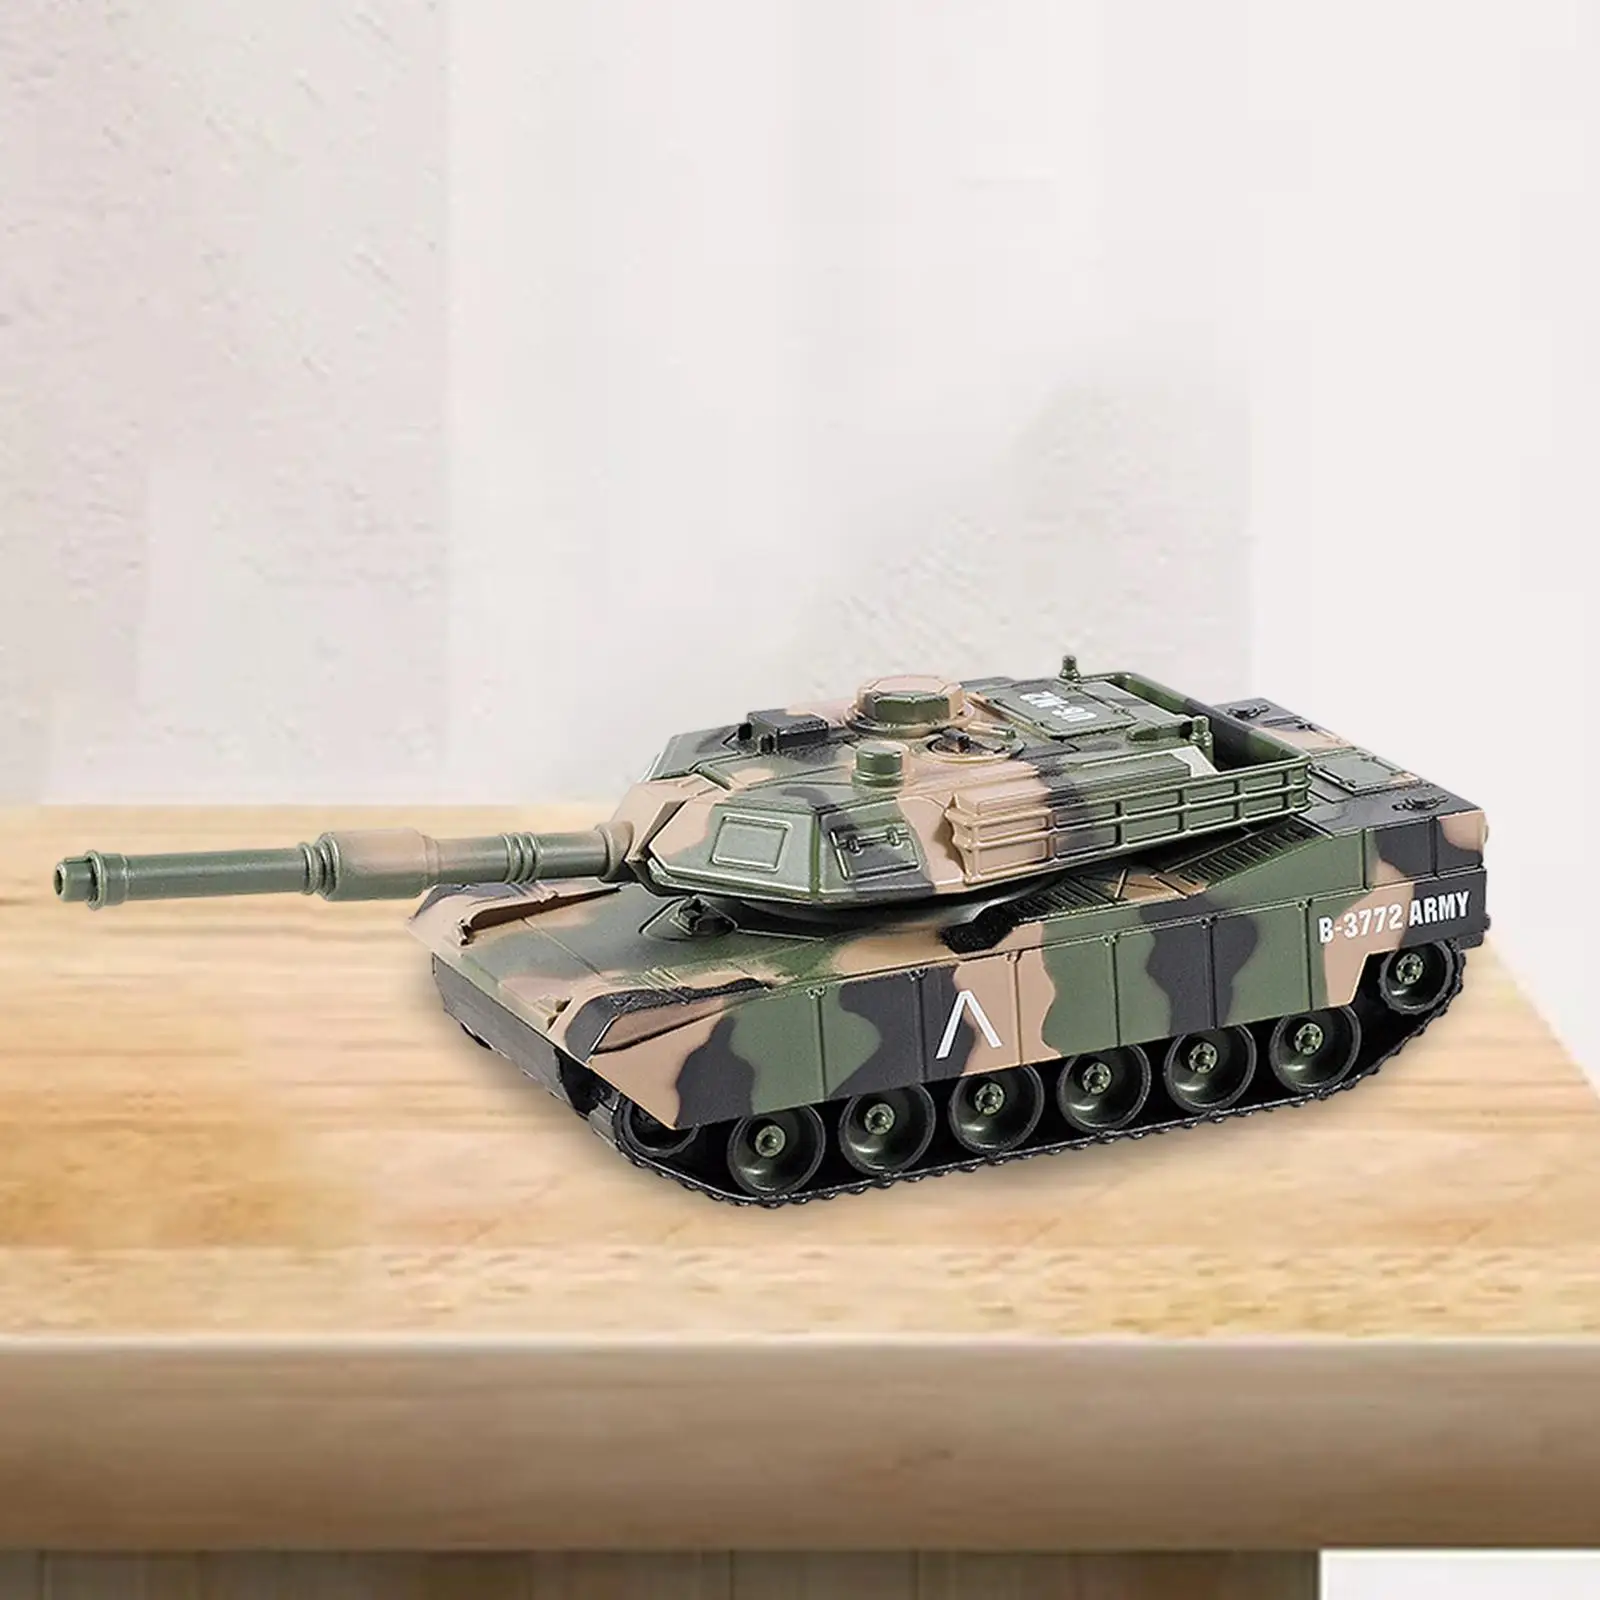 1:24 Tank Toy with Light and Sound Rotating Fort Pullback Motion Pull Back Tank Toy for 3-7 Years Old Boys Kids Girls Gift